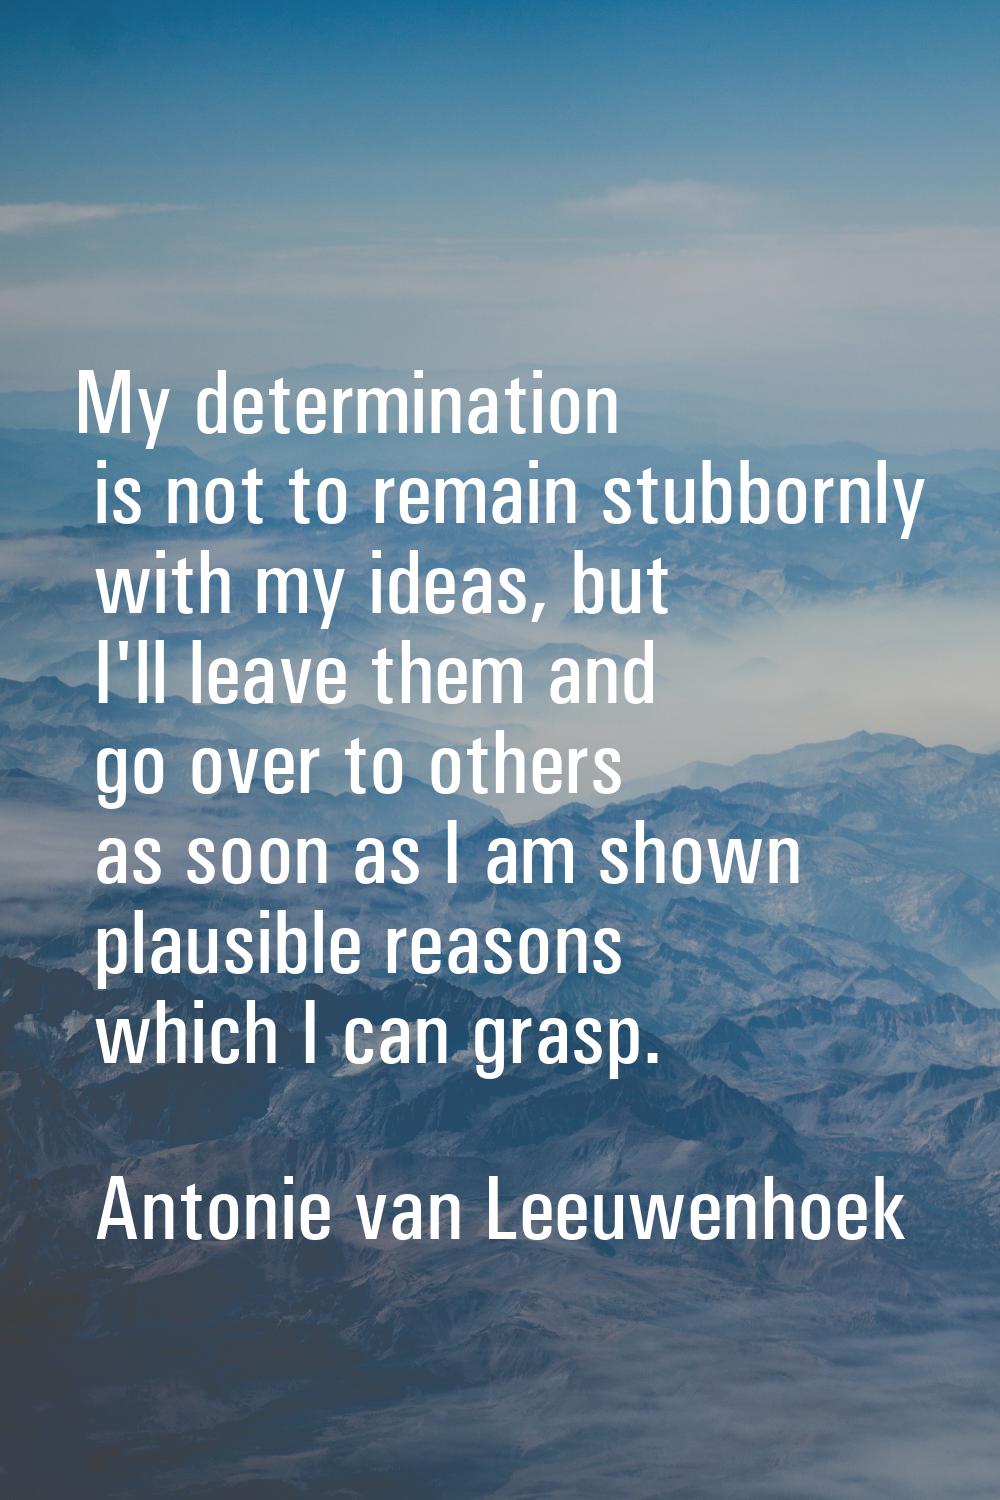 My determination is not to remain stubbornly with my ideas, but I'll leave them and go over to othe